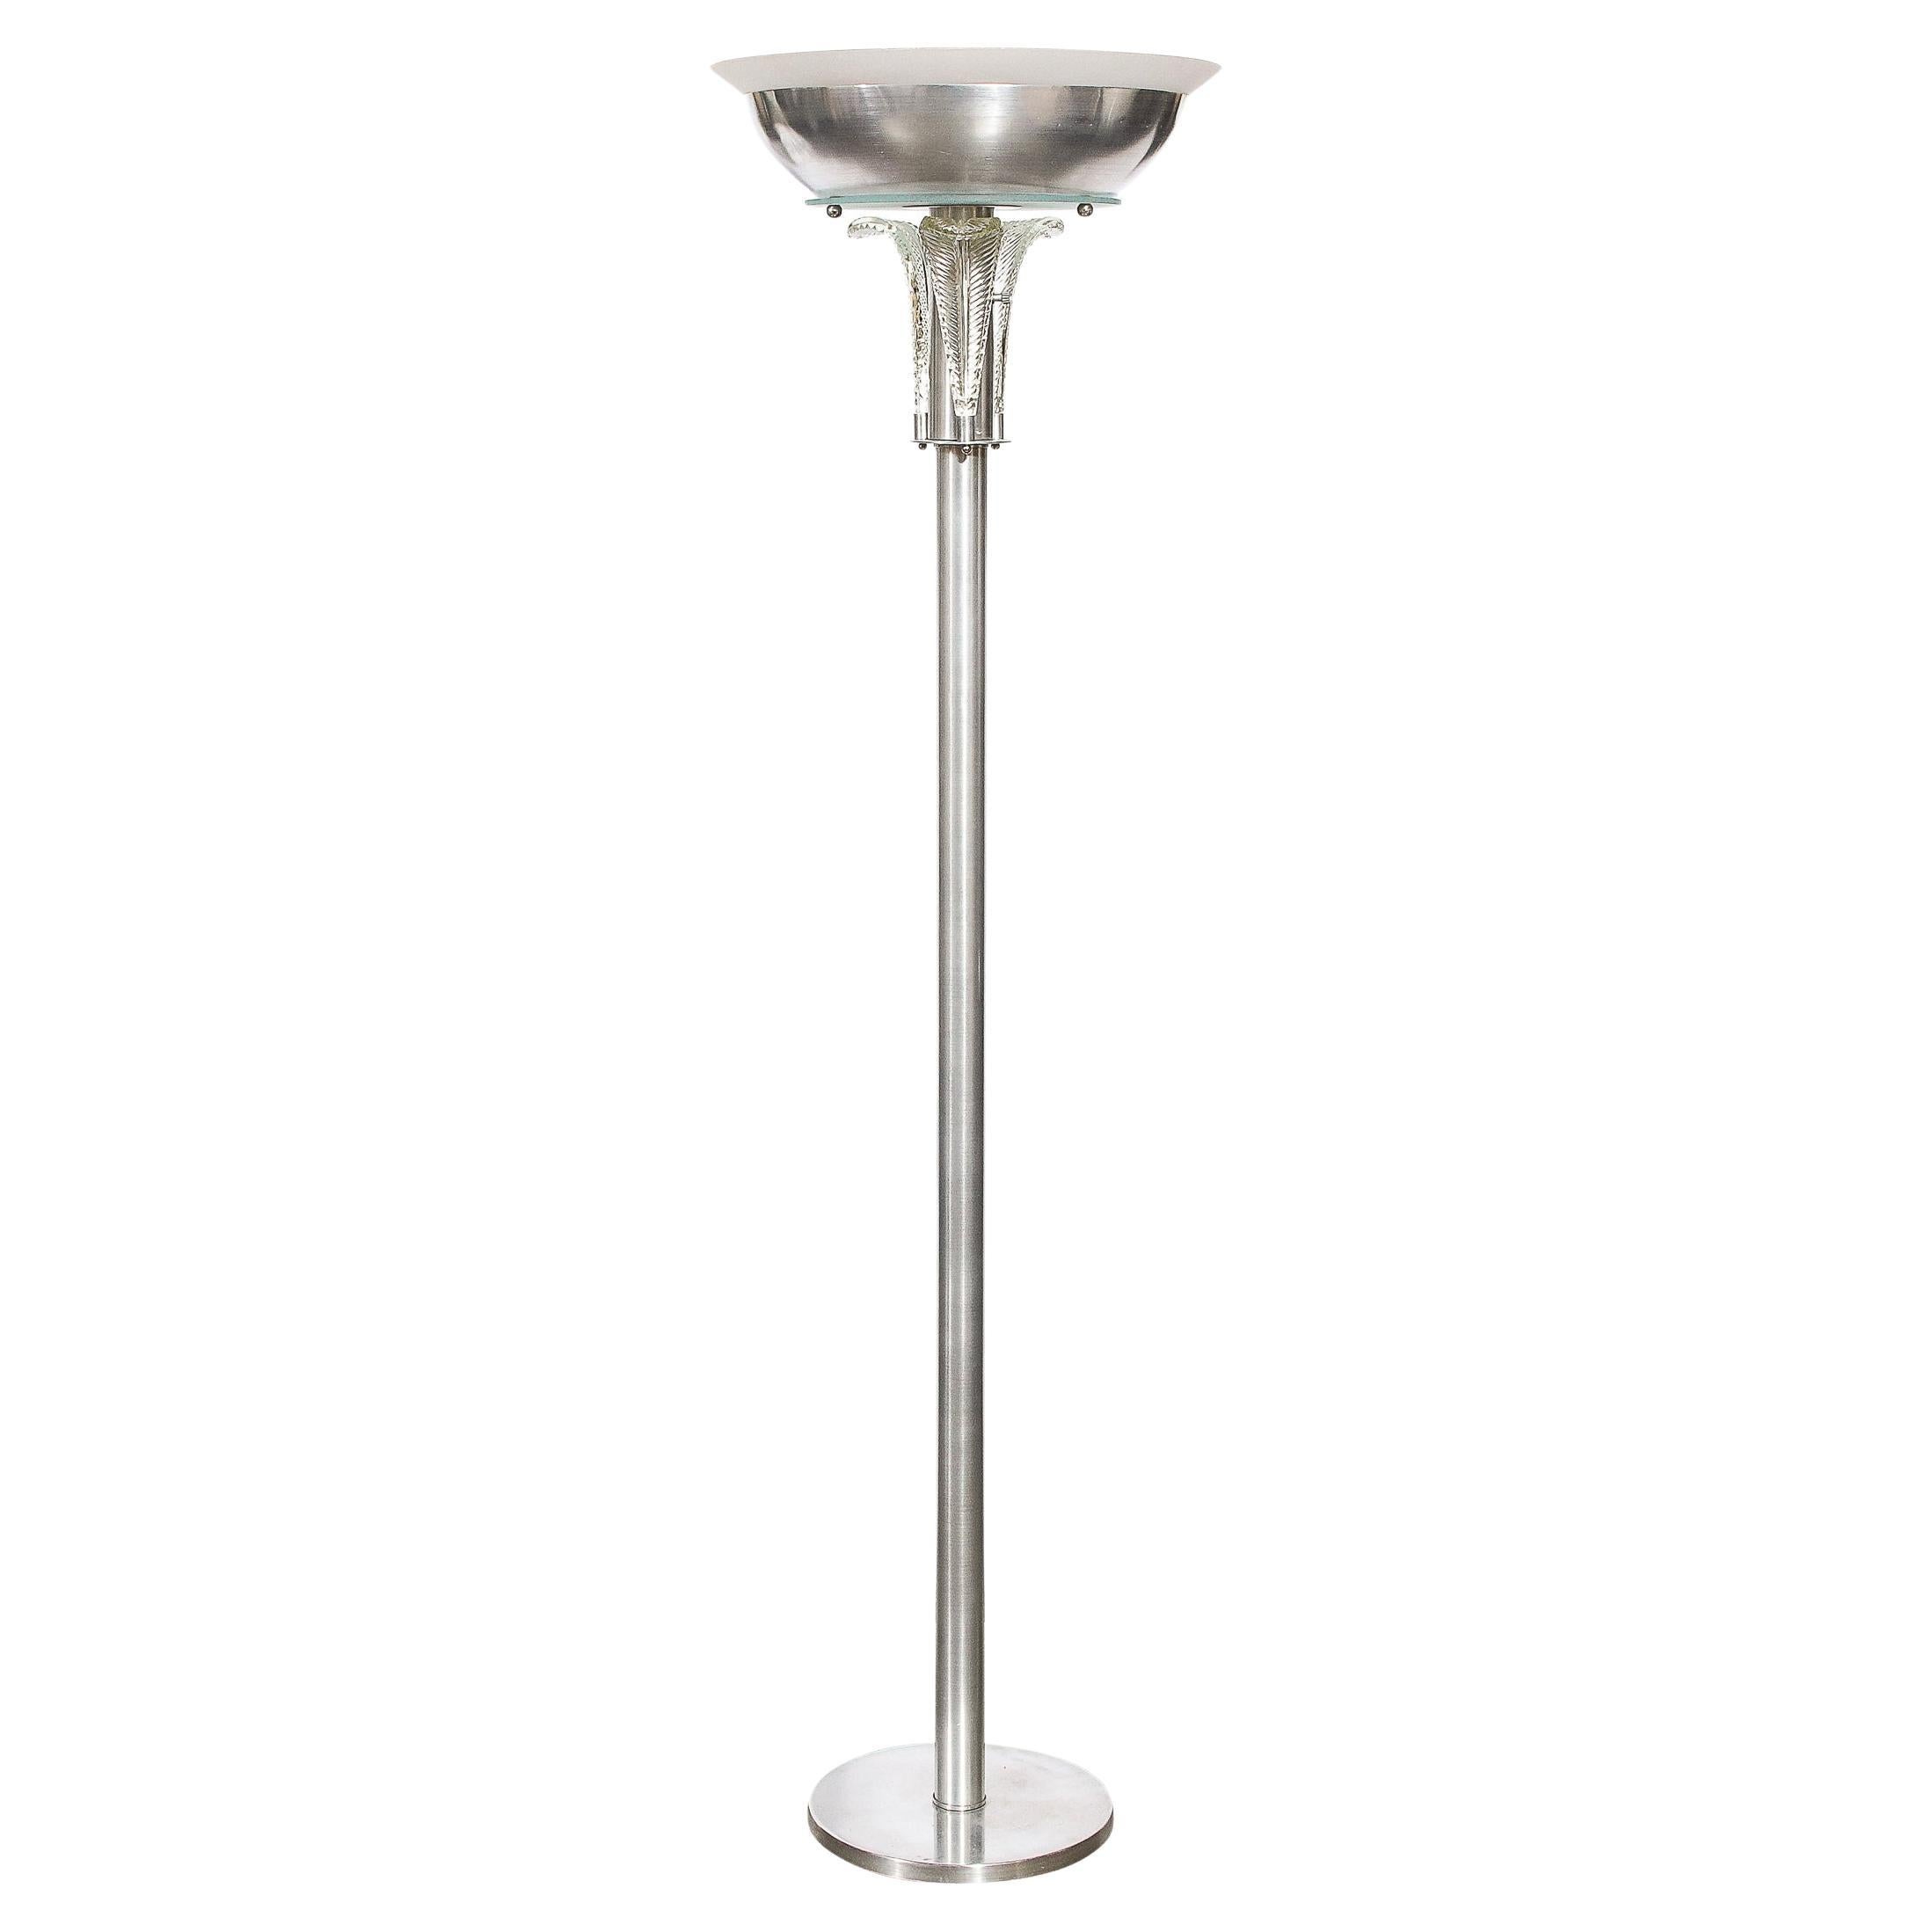 Art Deco "Palma" Torchiere in Glass & Brushed Aluminum by Walter Von Nessen For Sale